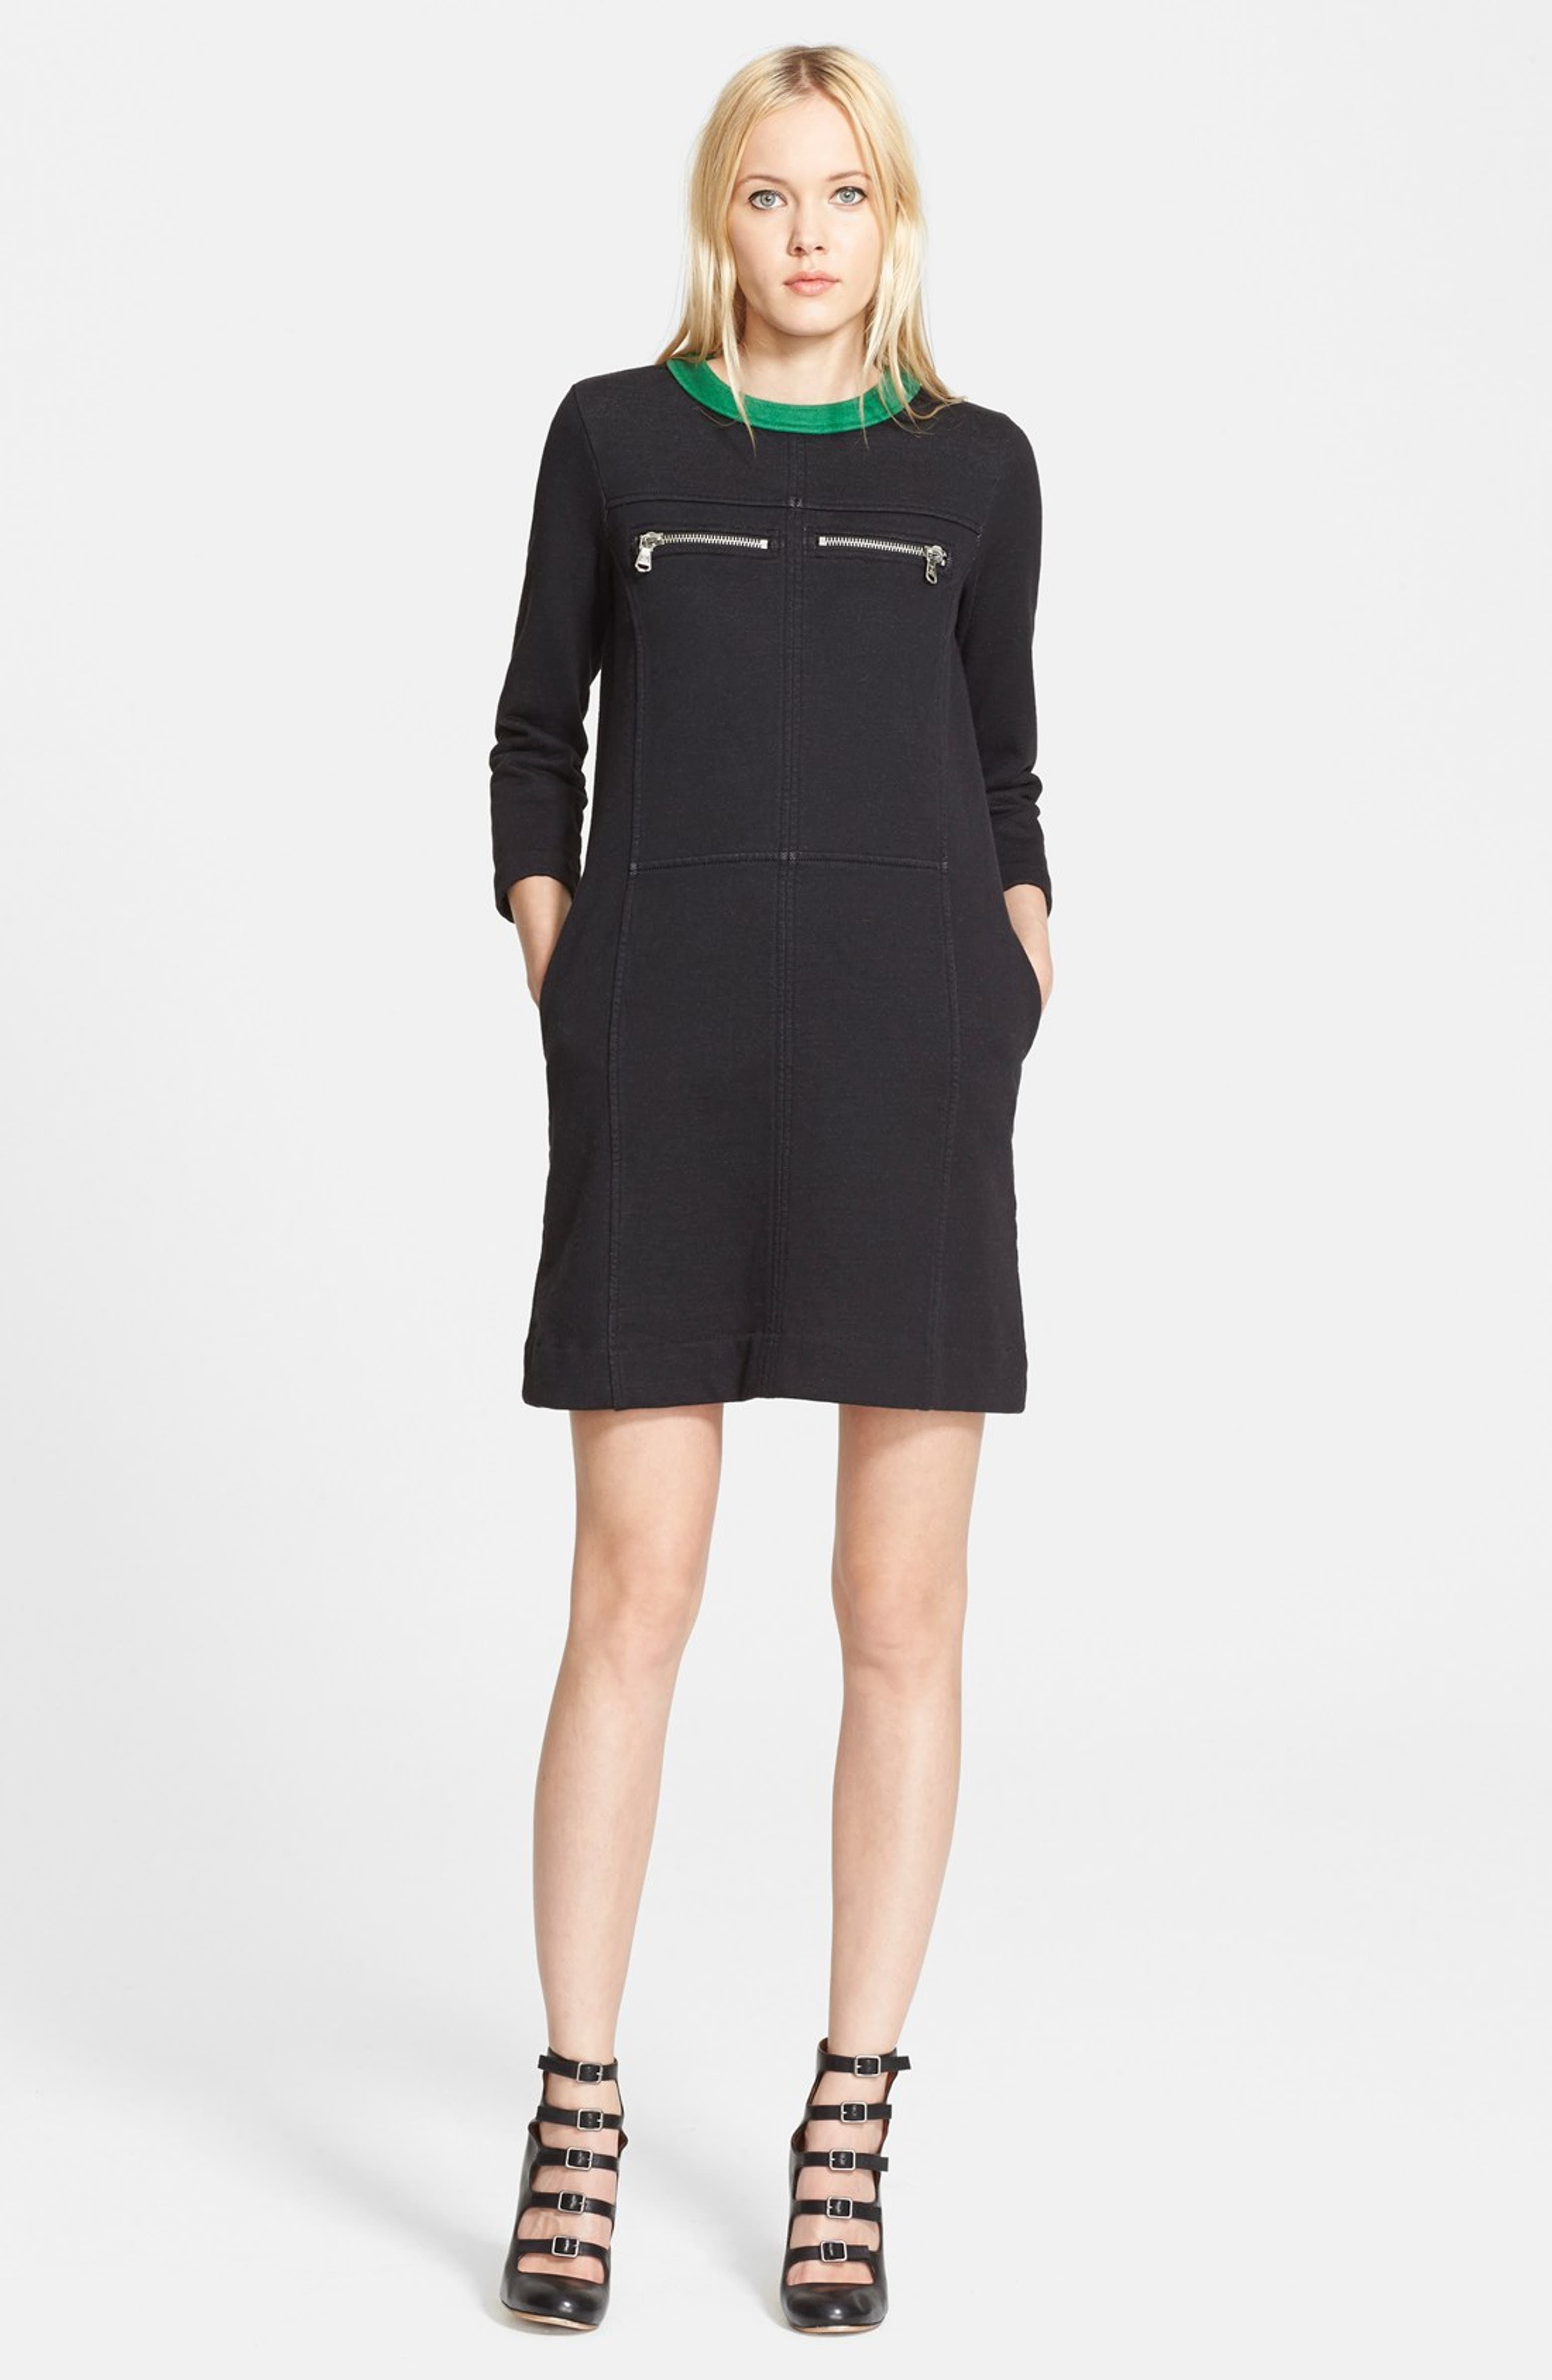 MARC BY MARC JACOBS 'Peyton' French Terry A-Line Shift Dress | Nordstrom